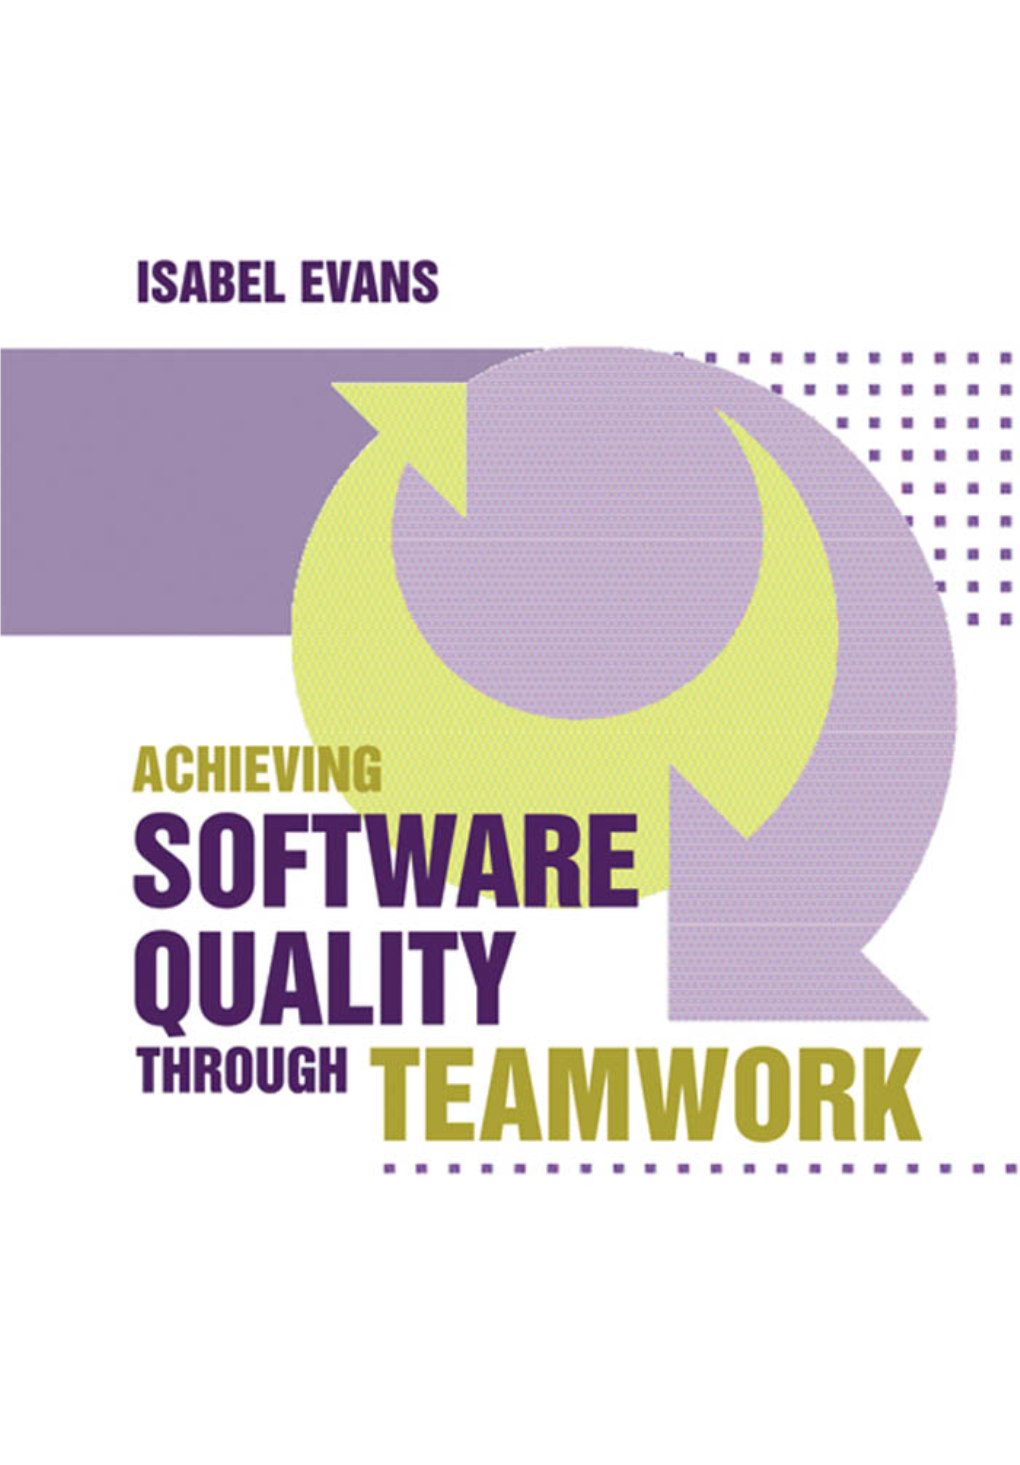 Achieving Software Quality Through Teamwork for a Listing of Recent Titles in the Artech House Computing Library, Turn to the Back of This Book